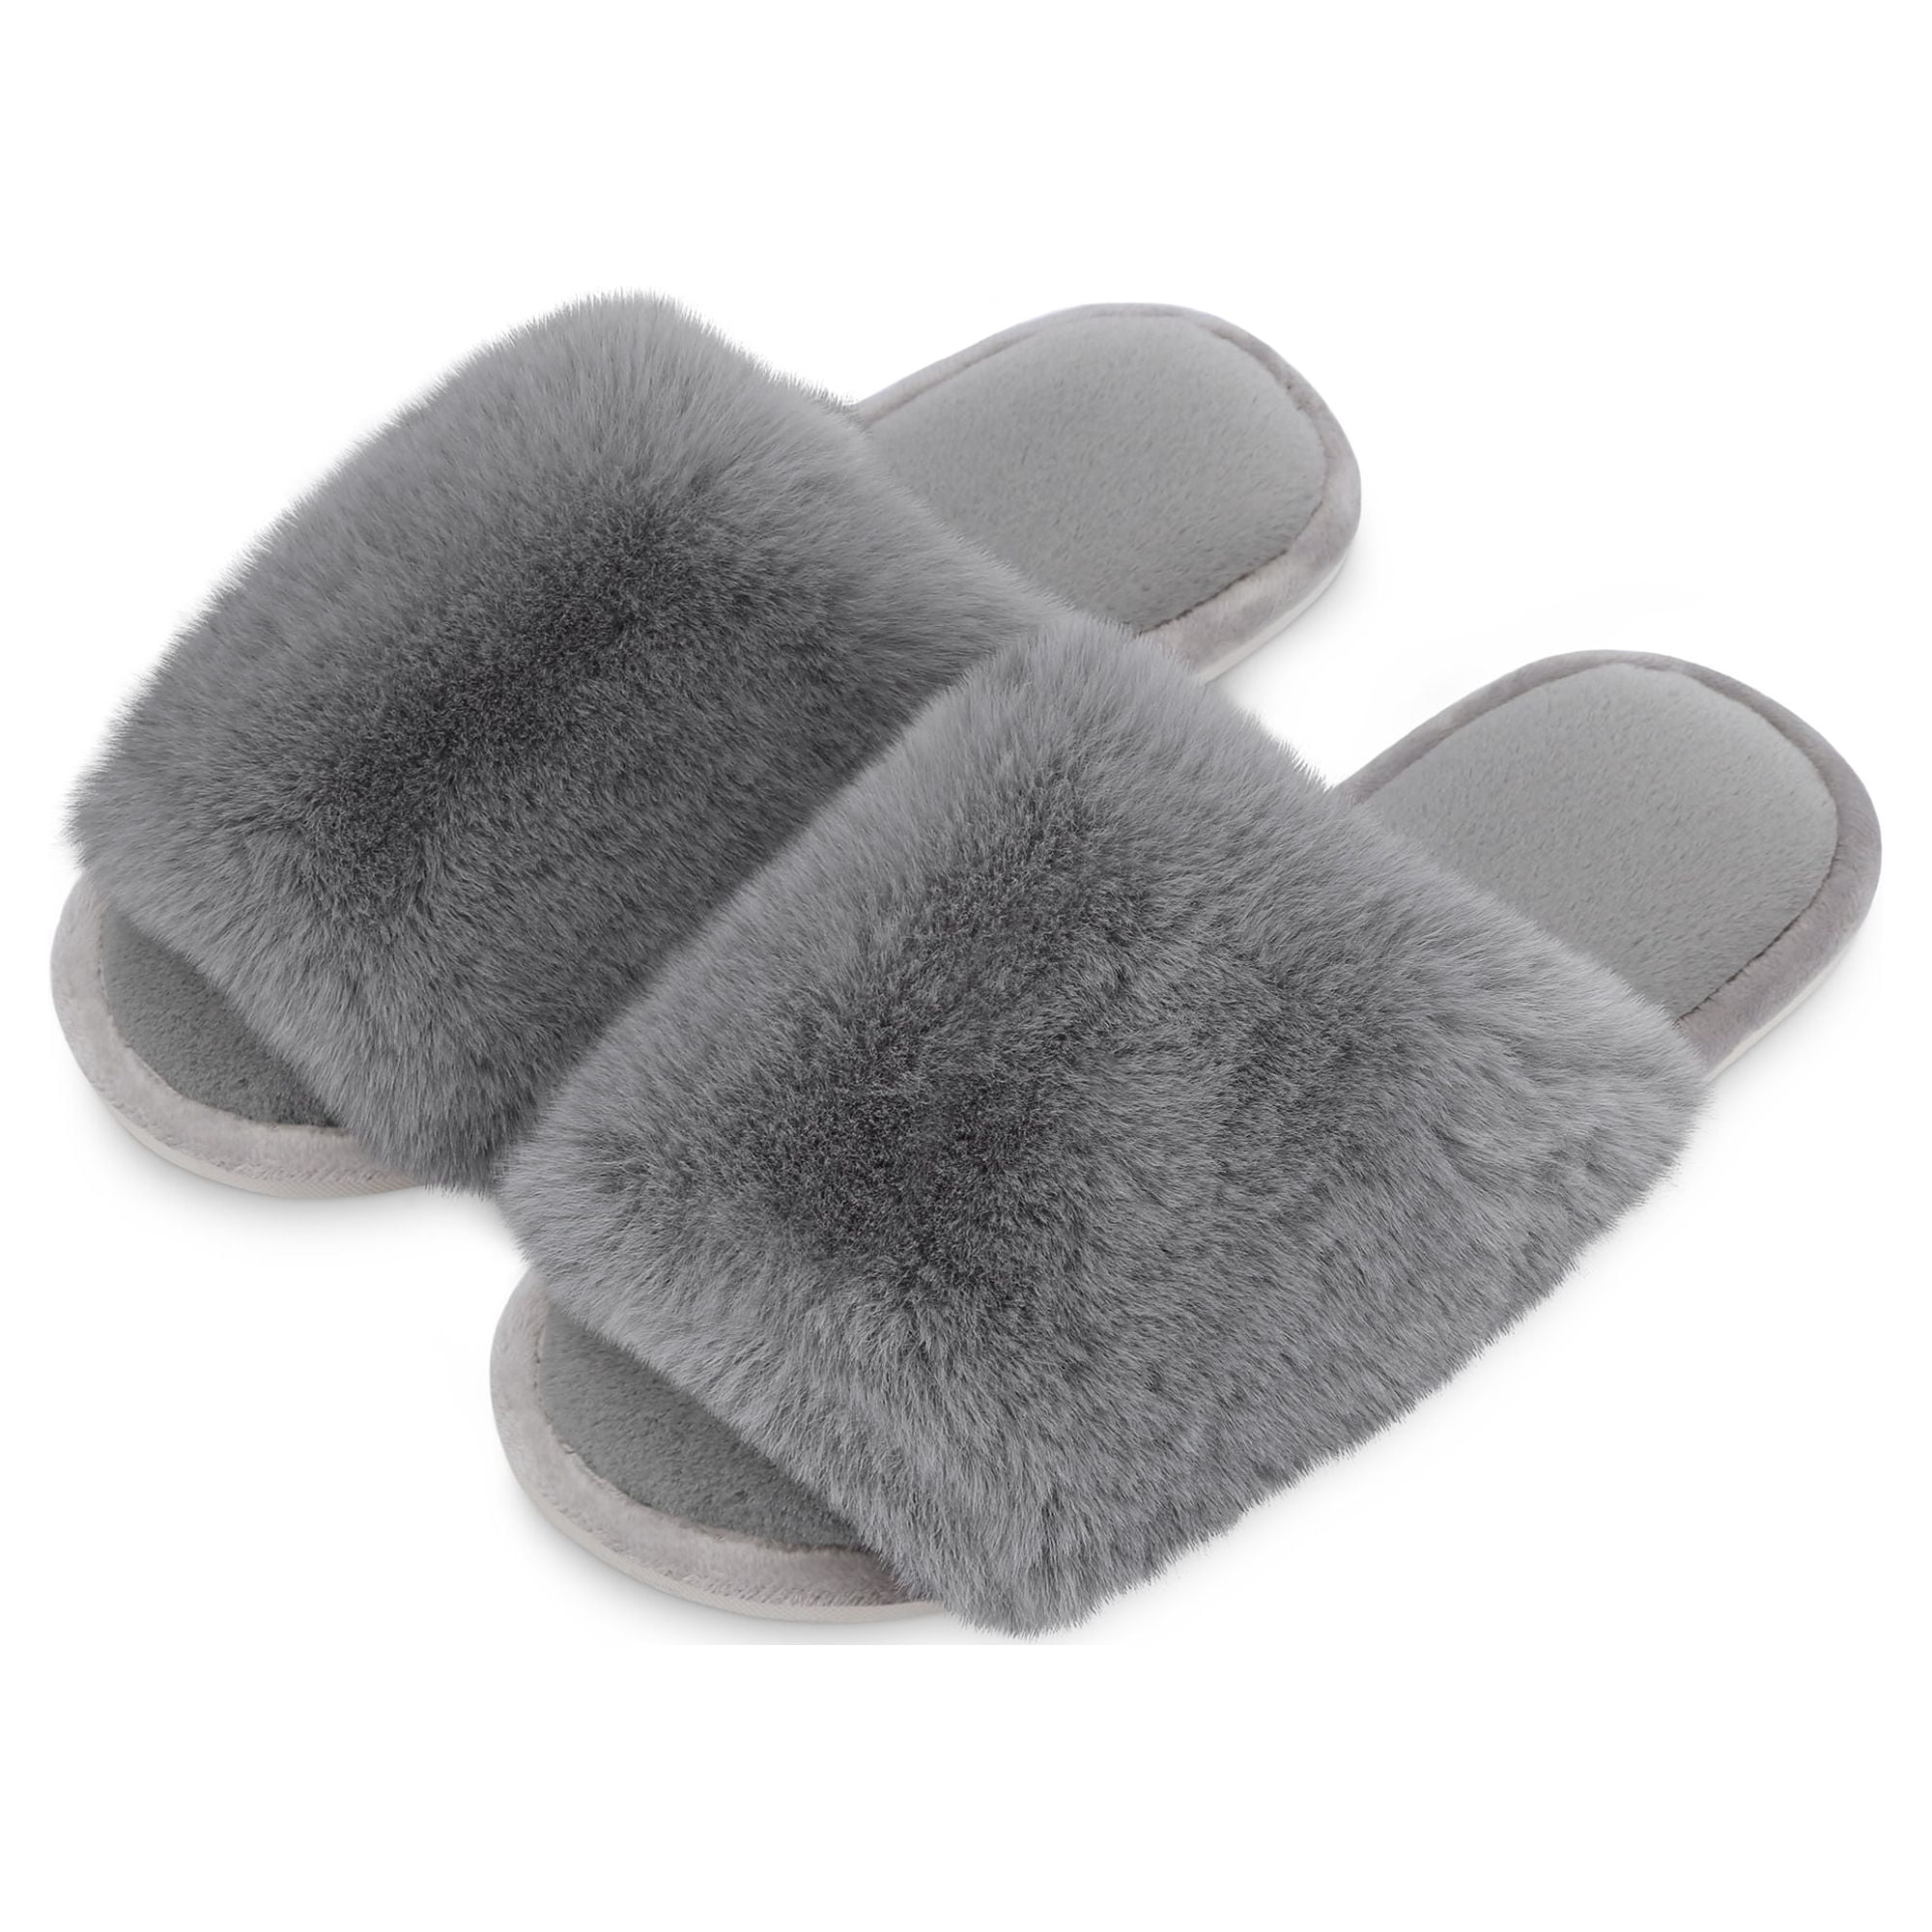 Men's Suede Mule Slippers | Clothing Sale | The White Company UK